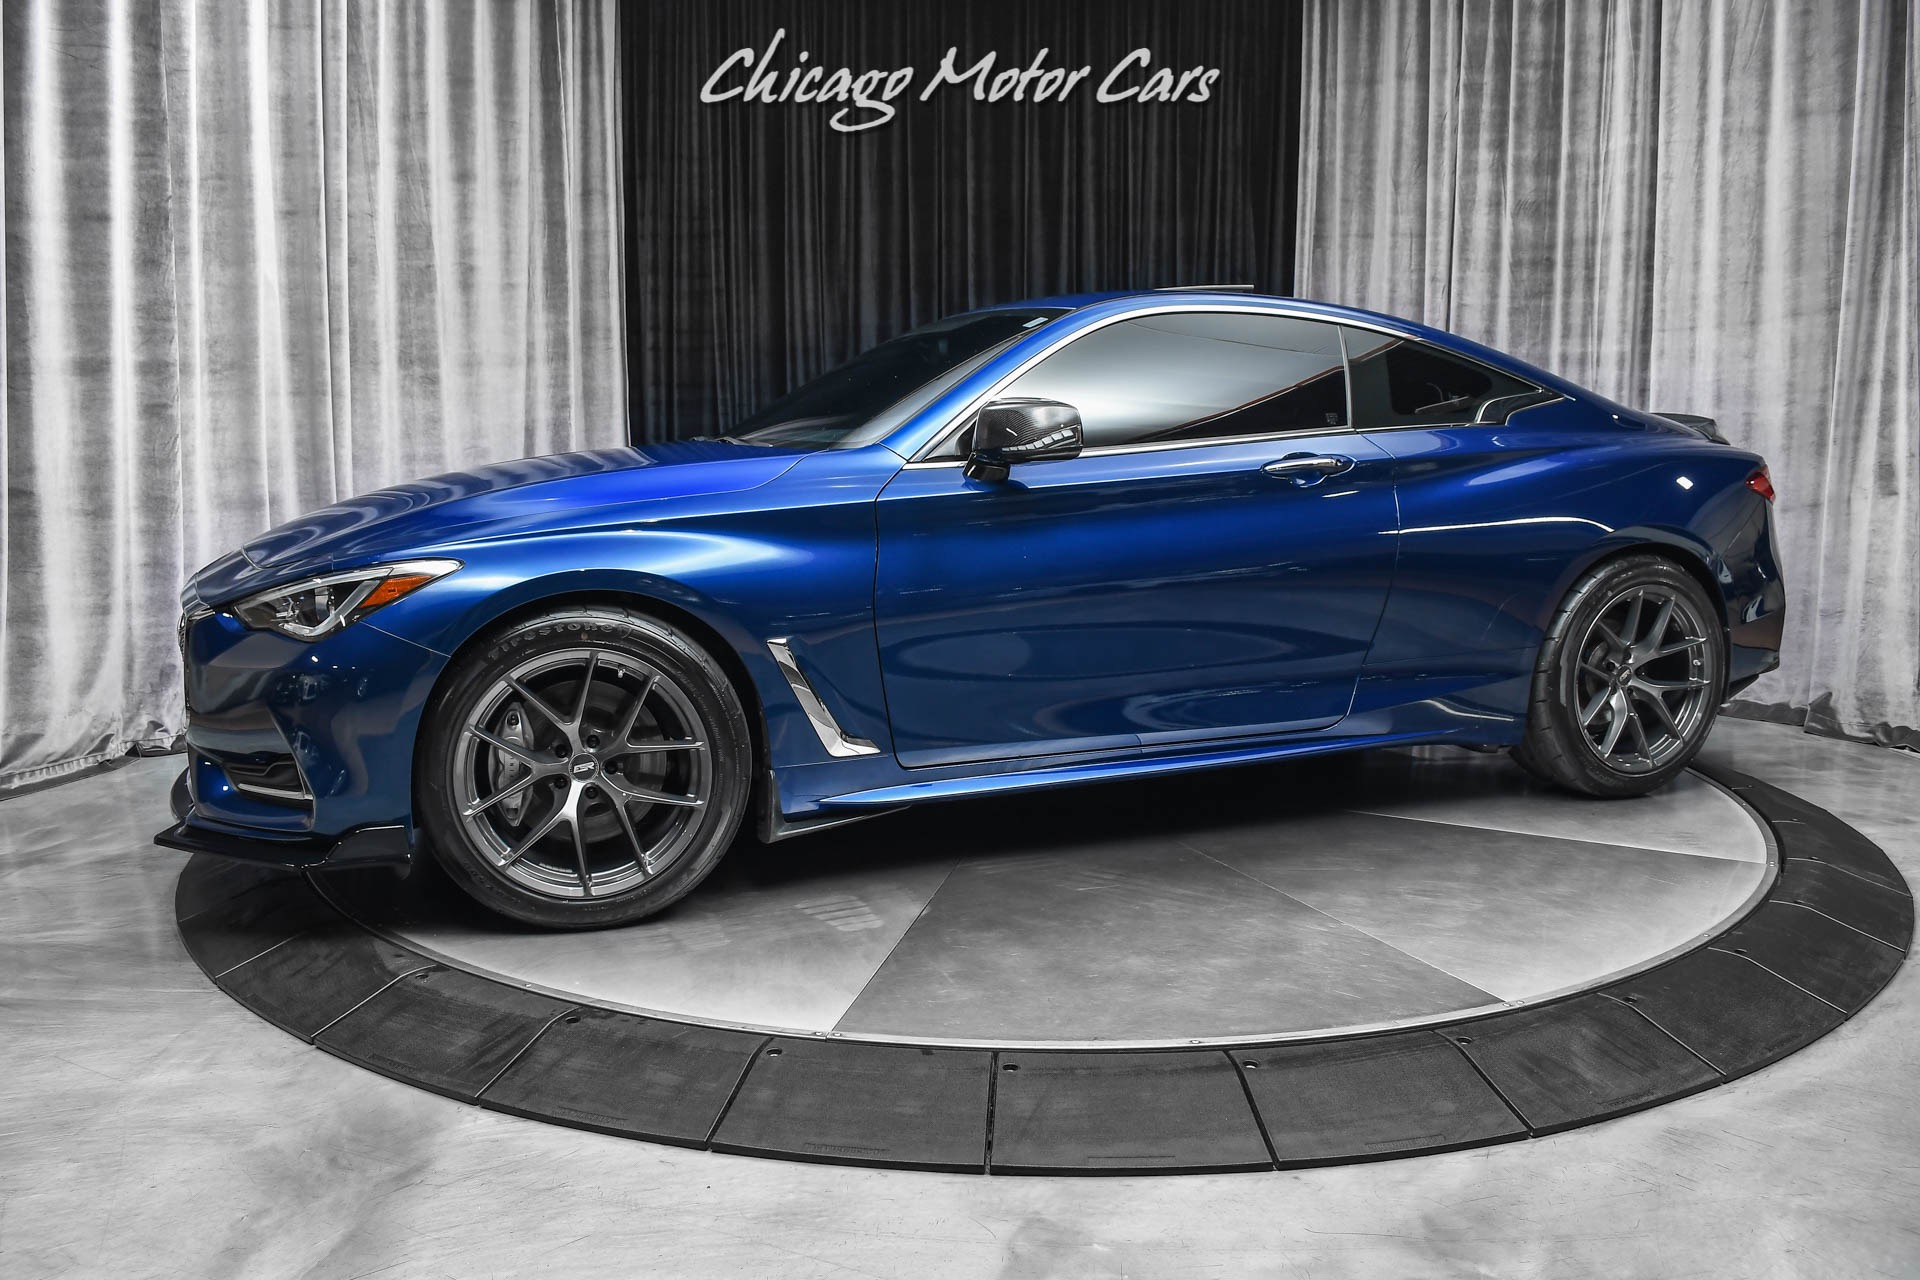 Used 2018 Infiniti Q60 3.0T Sport Coupe AMS PERFOMANCE 500WHP+ AWD! $54K+  MSRP LOADED For Sale ($5,980) | Chicago Motor Cars Stock #18971